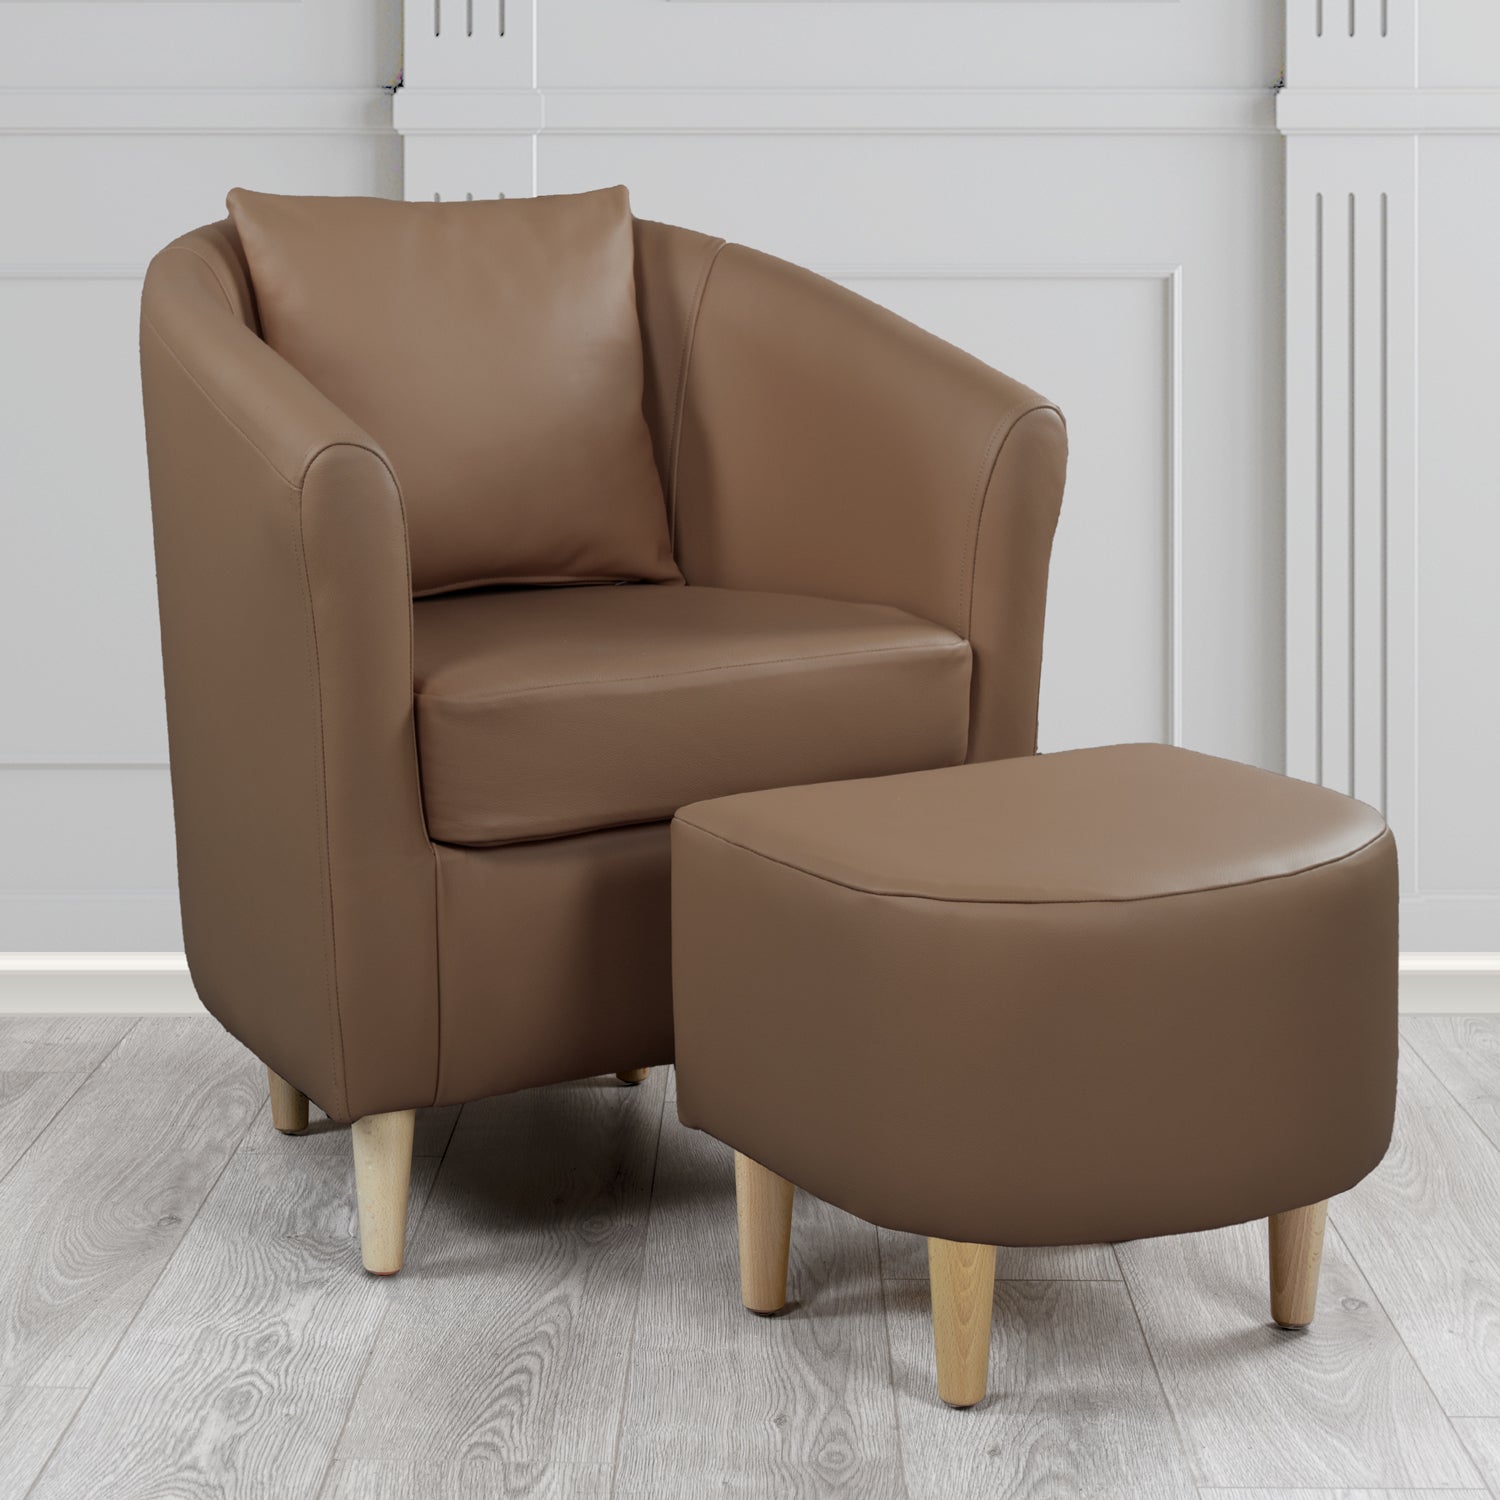 St Tropez Shelly Mocha Crib 5 Genuine Leather Tub Chair & Footstool Set With Scatter Cushion (6619506016298)